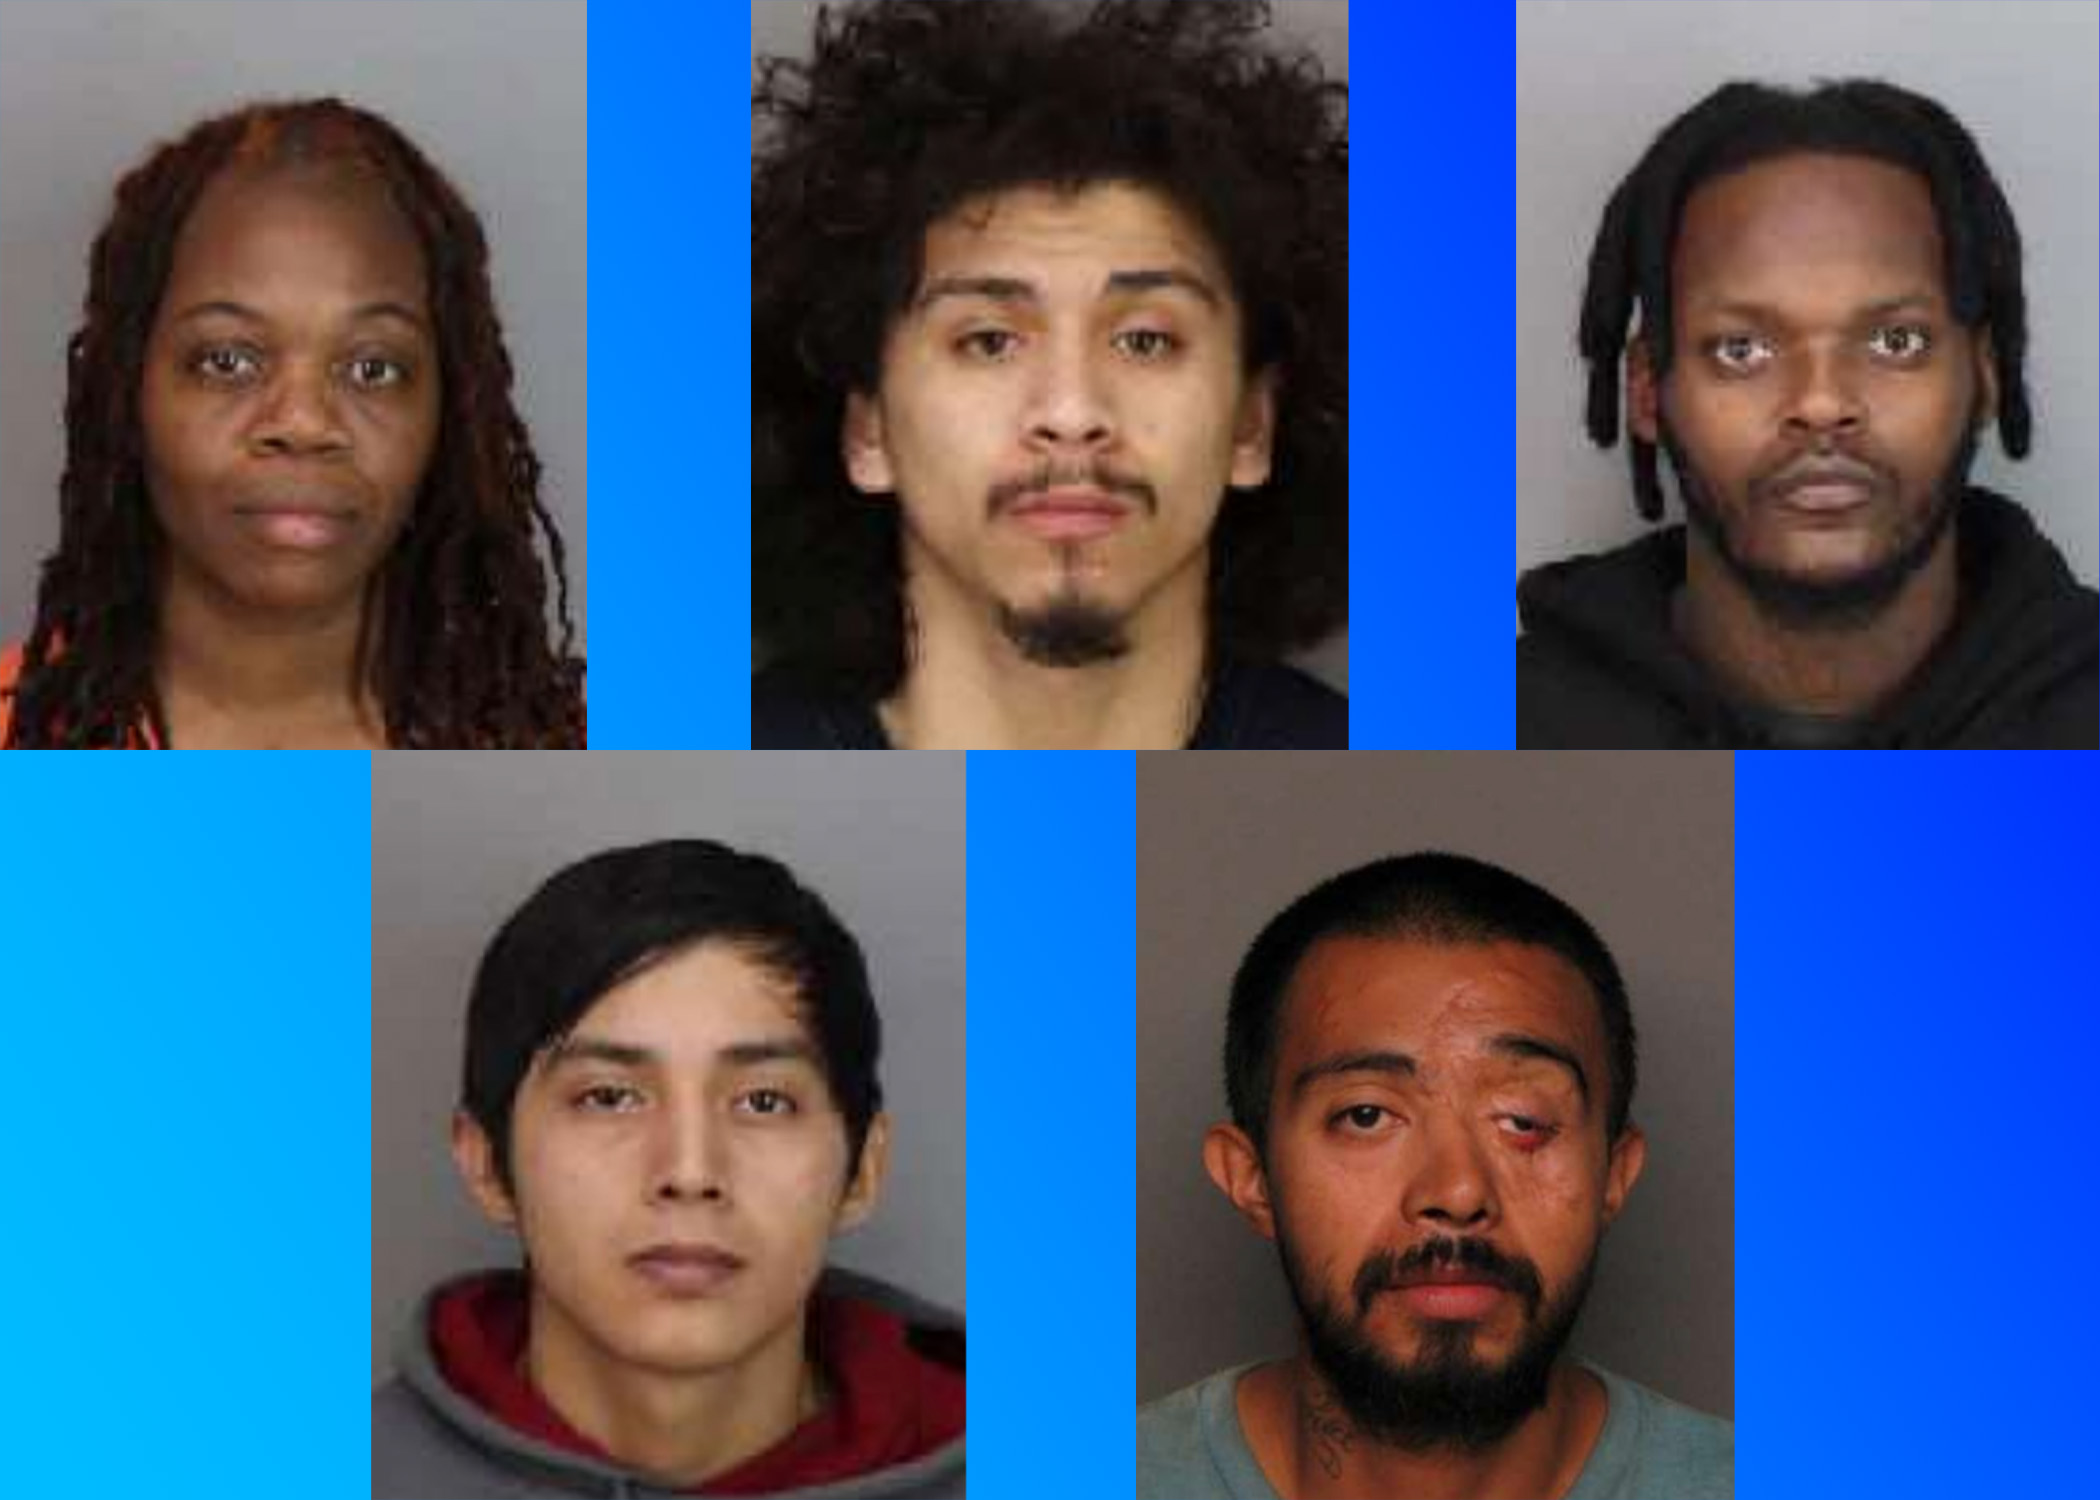 Leeds PD arrest 5 people in connection to fentanyl overdose, selling narcotics